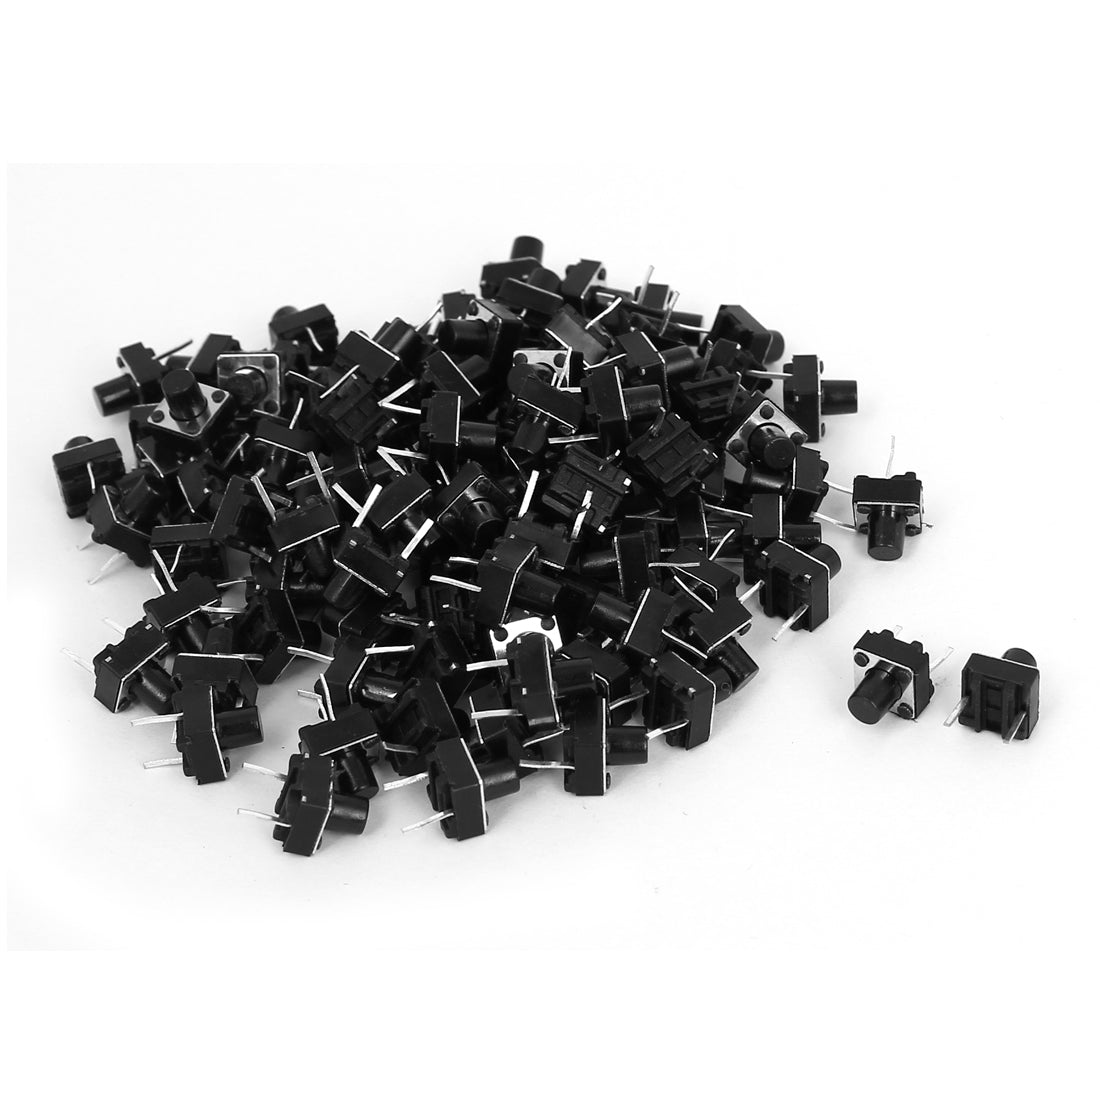 uxcell Uxcell 100 Pcs DIP 2 Pin Momentary Push Button Tactile Tact Switches 6 x 6 x 7mm